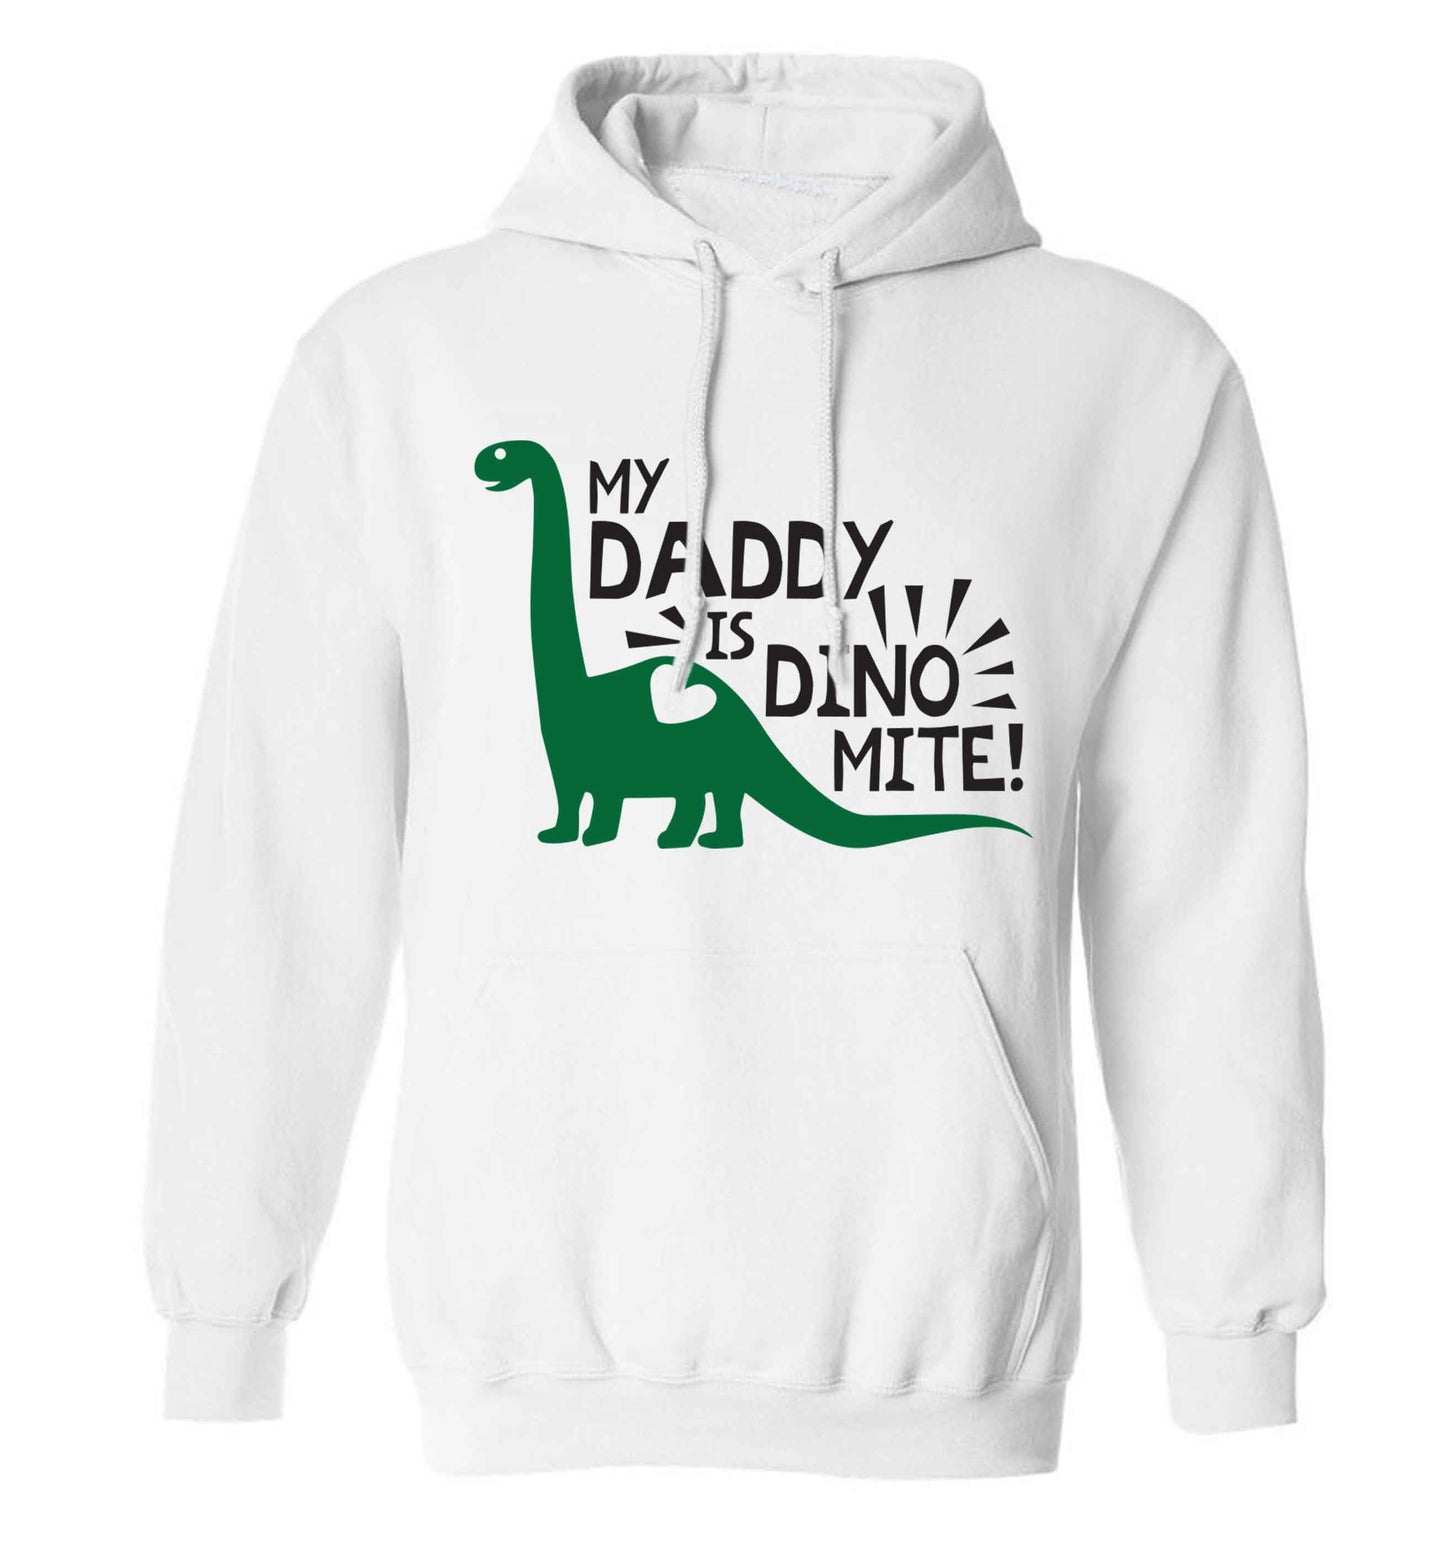 My daddy is dinomite! adults unisex white hoodie 2XL